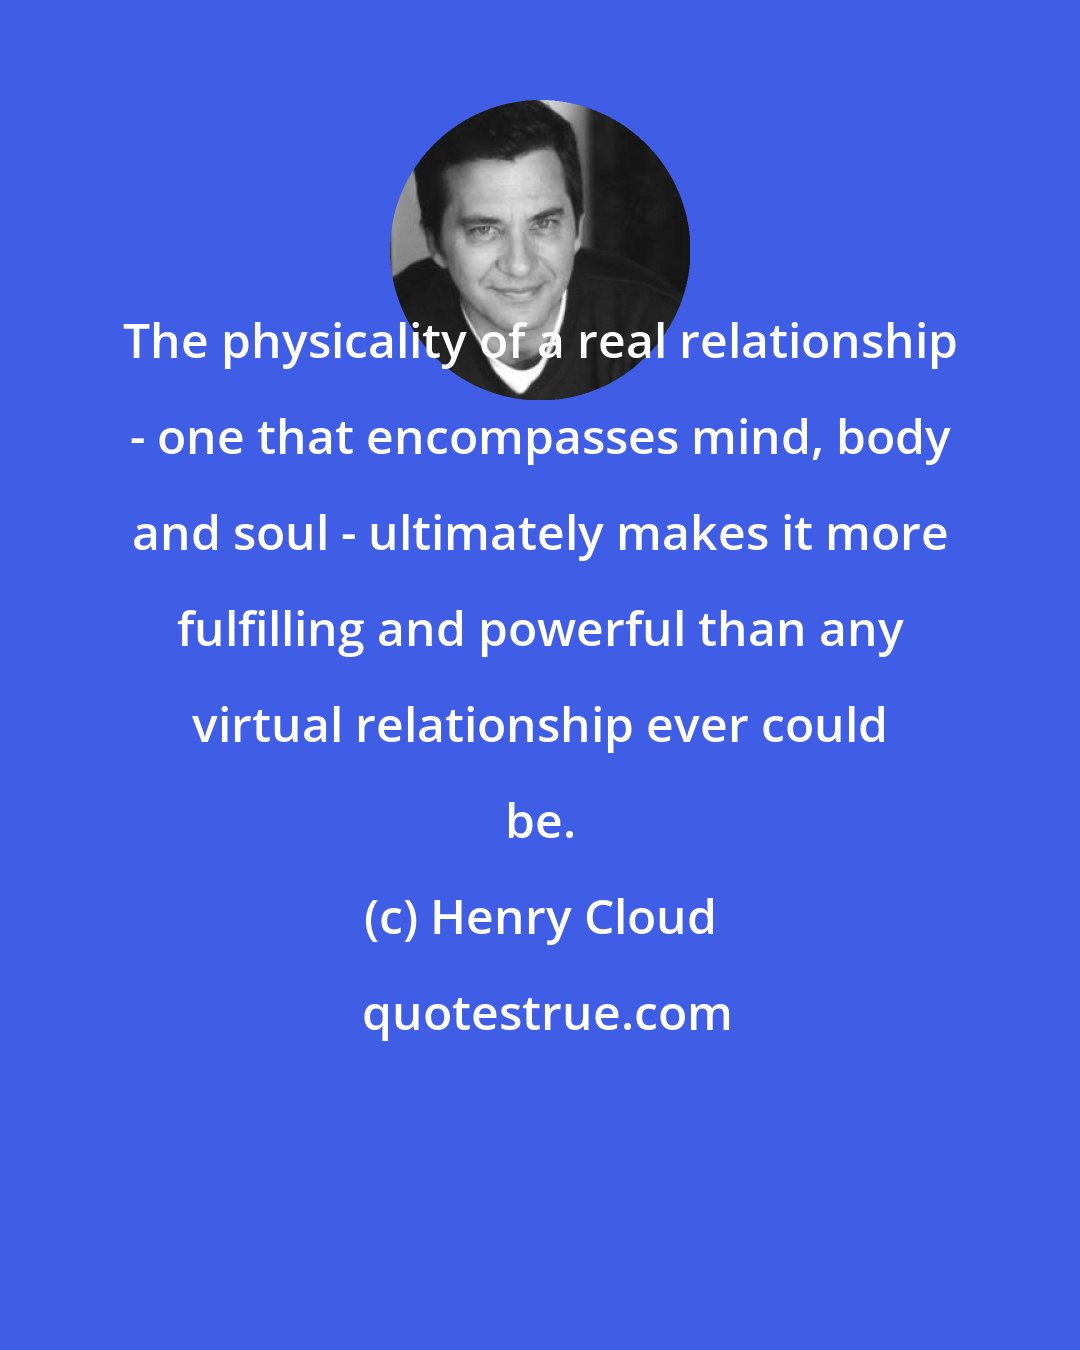 Henry Cloud: The physicality of a real relationship - one that encompasses mind, body and soul - ultimately makes it more fulfilling and powerful than any virtual relationship ever could be.